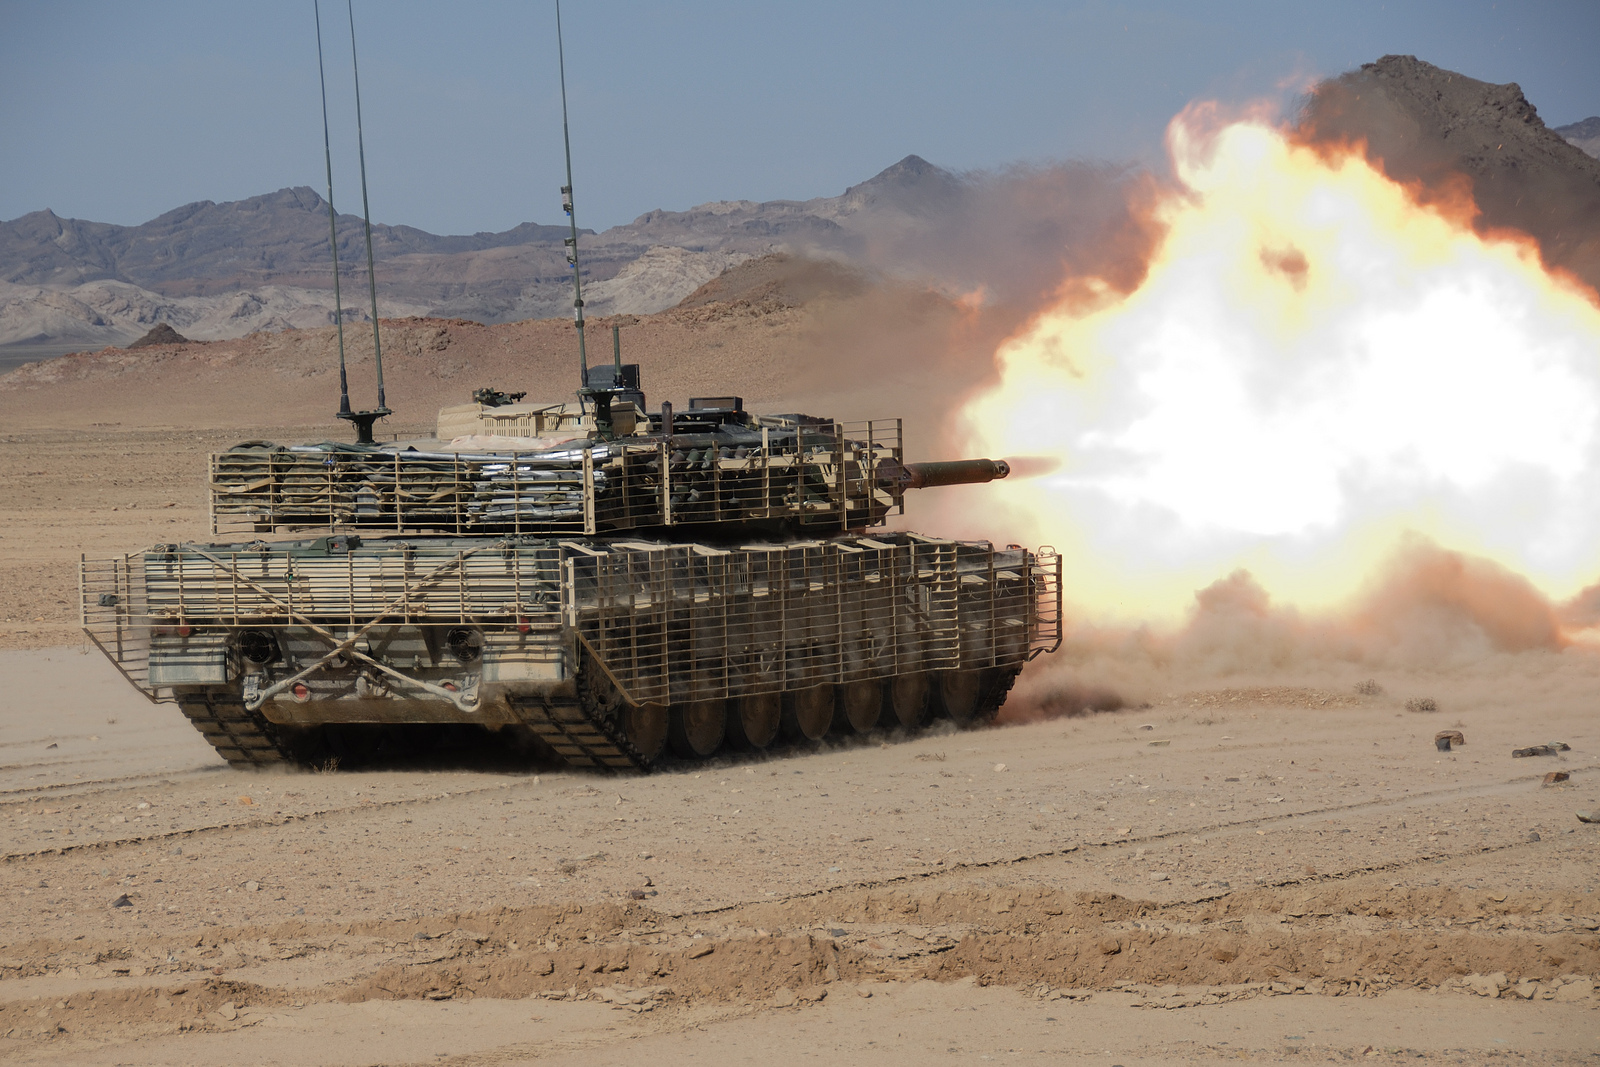 Zarhey, Afghanistan. 18 February 2008 - A Canadian Leopard 2 tank from C Squadron, Lord Strathcona's Horse (LdSH), fires during a firing-range exercise to adjust the 120-mm guns, near an advanced operations base in the Panjwayi district of Afghanistan. (Photo by: Cpl Simon Duchesne, HQ, JTF AFG, ROTO 4)